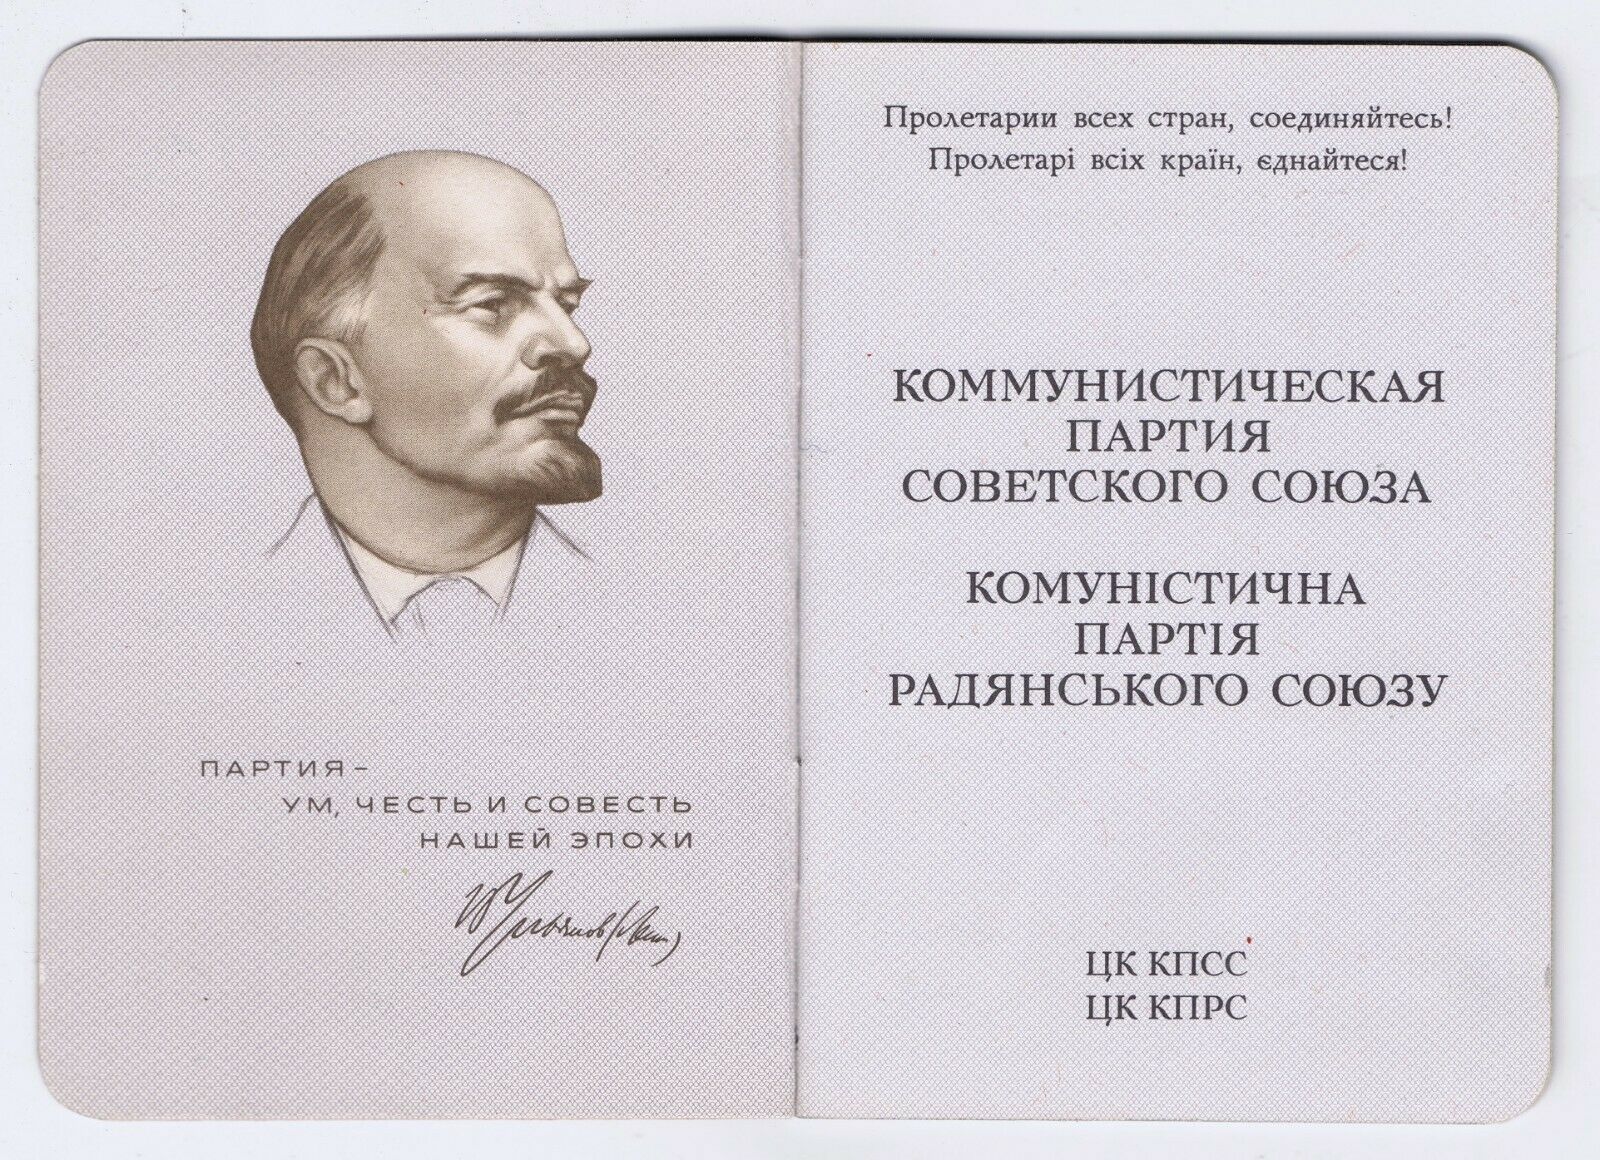 WOMAN of VALOR in NATURALLY RED (USSR - CCCP) COMMUNIST PARTY MEMBERSHIP BOOKLET